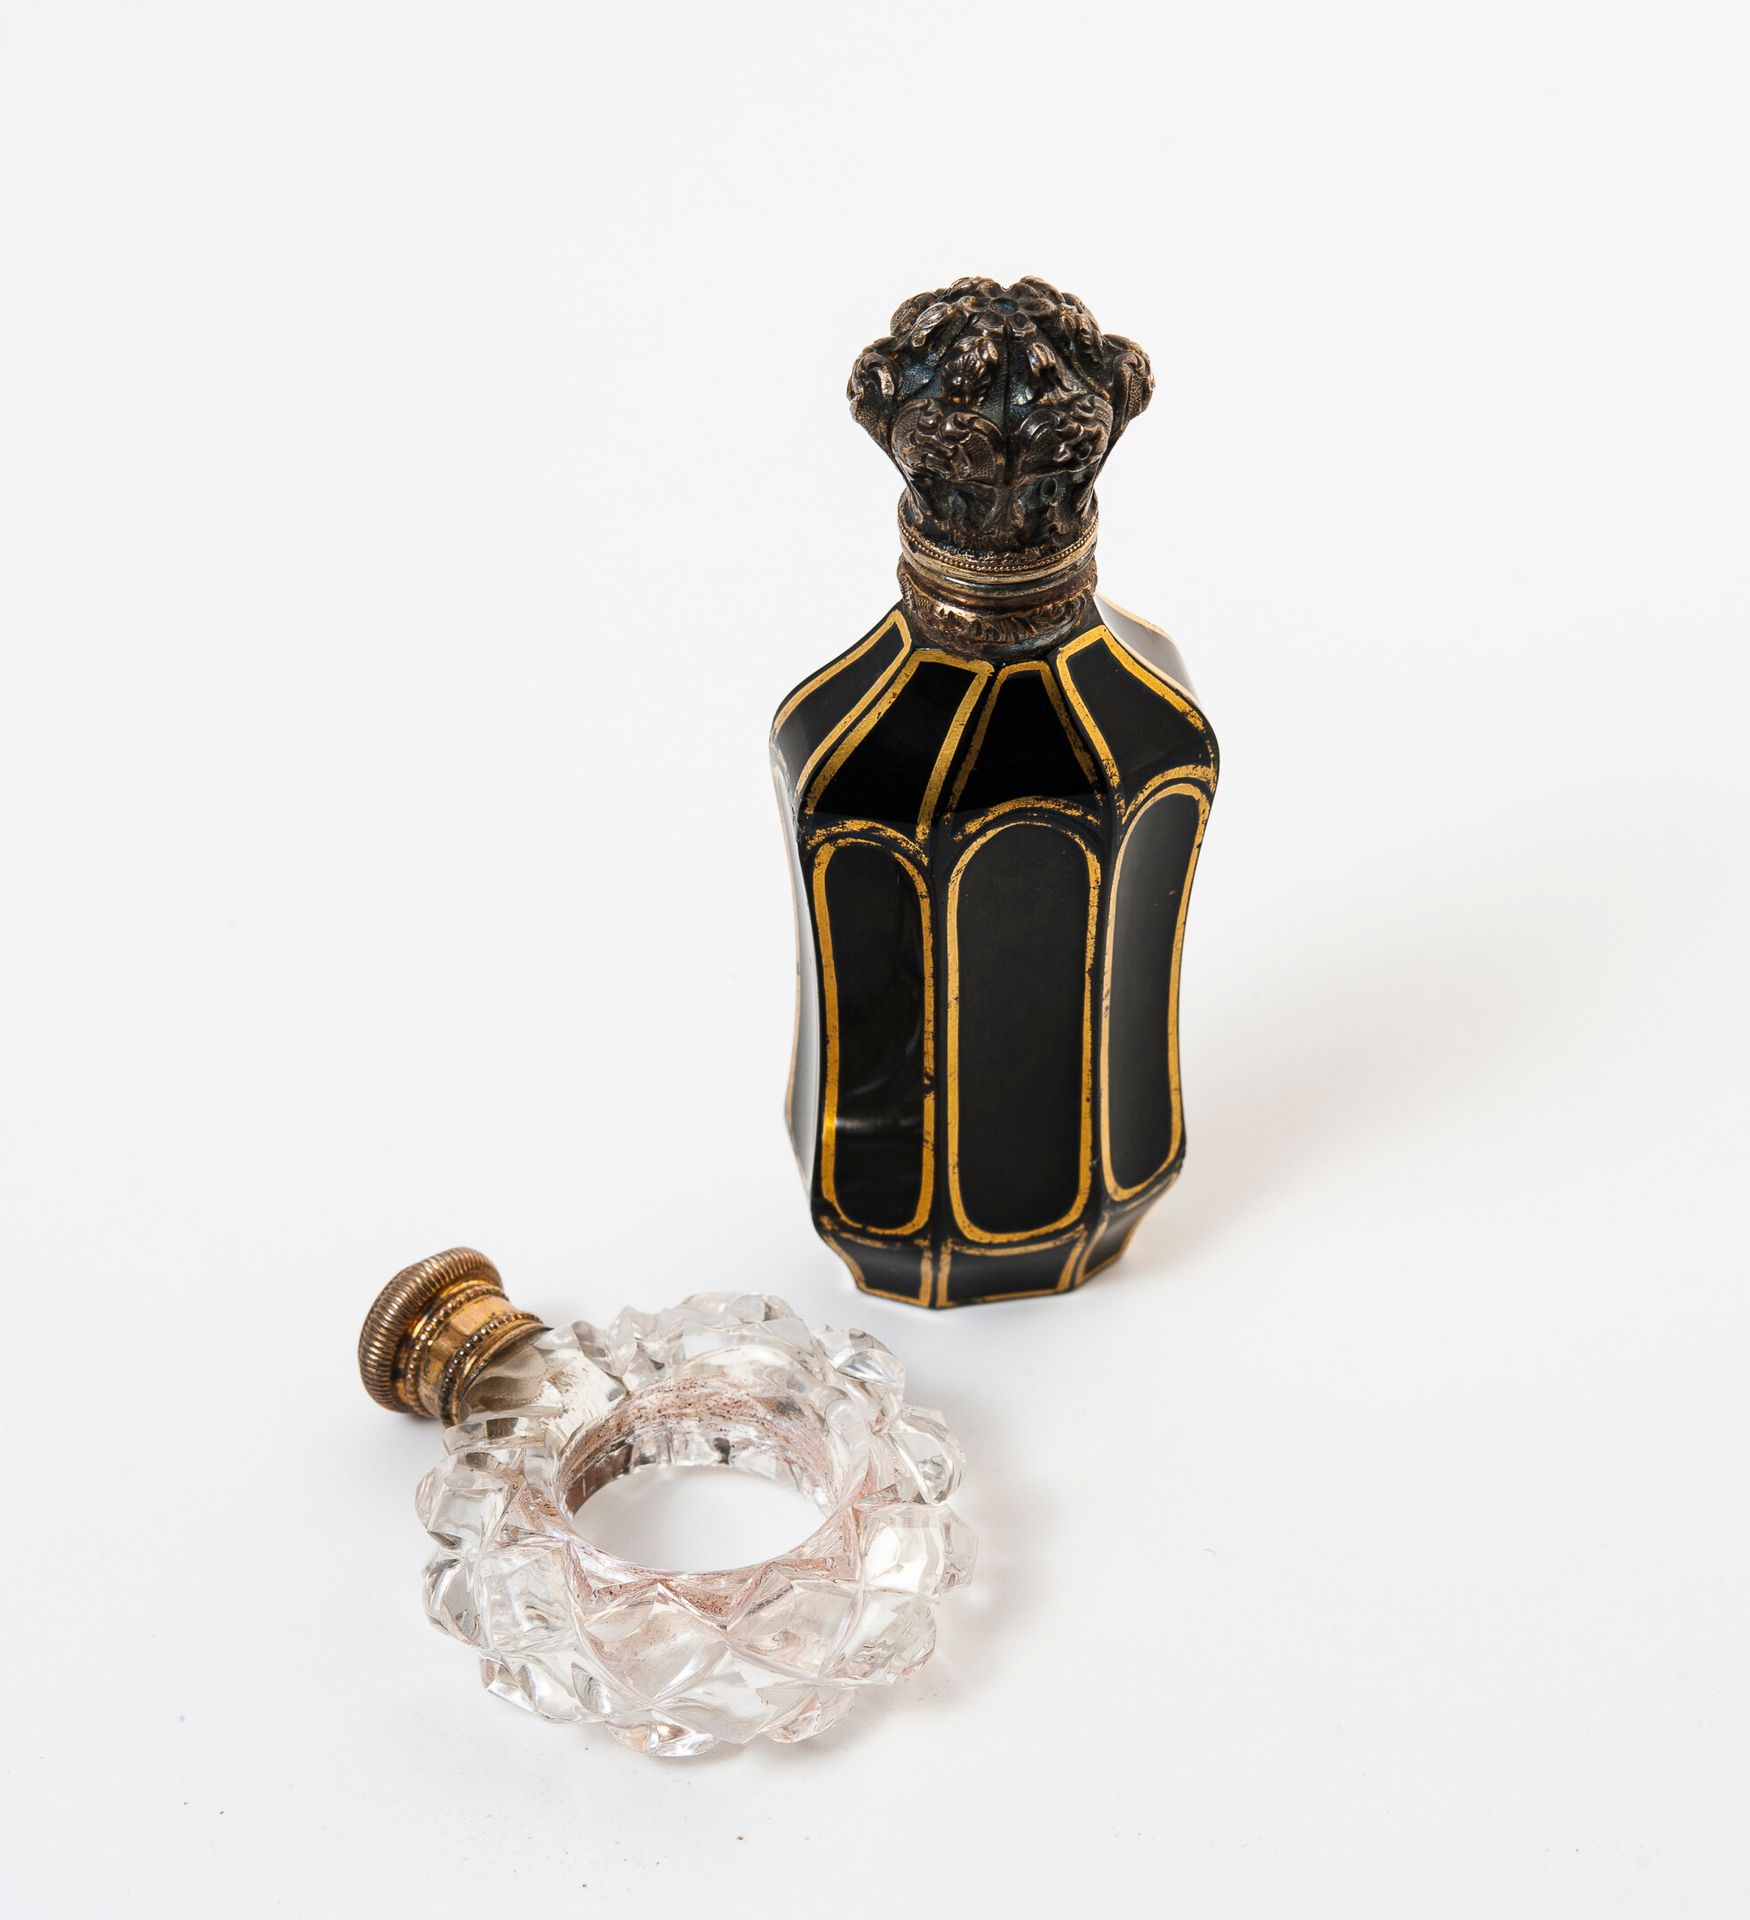 FRANCE, XIXEME SIECLE Two salt bottles :

- one with a ring-shaped body in cryst&hellip;